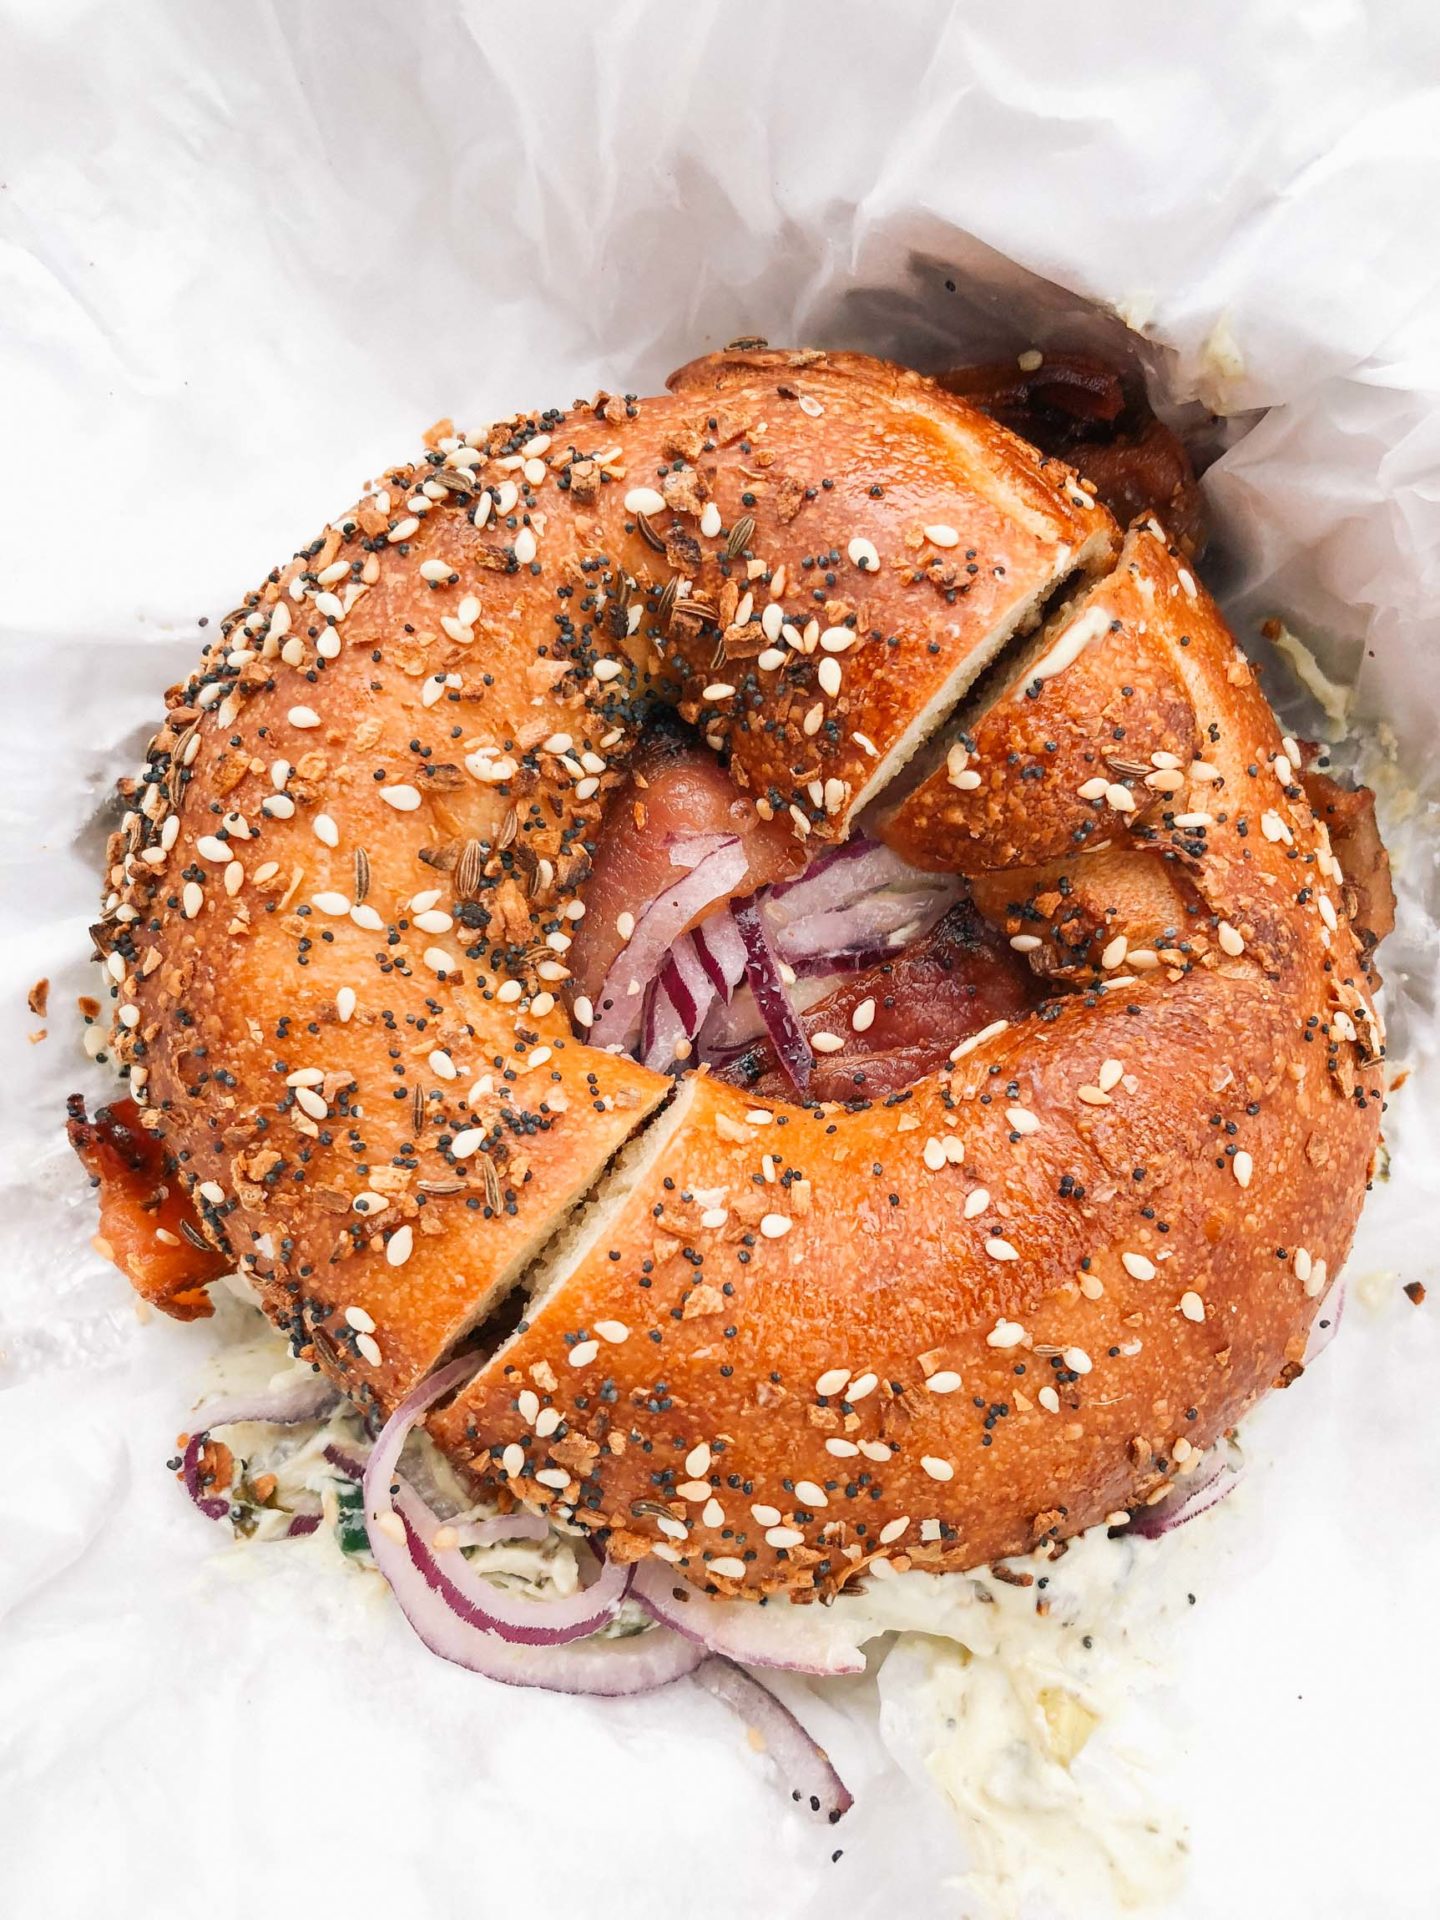 When visiting Providence, a stop at Rebelle Artisan Bagels for an everything bagel with lox is a must.